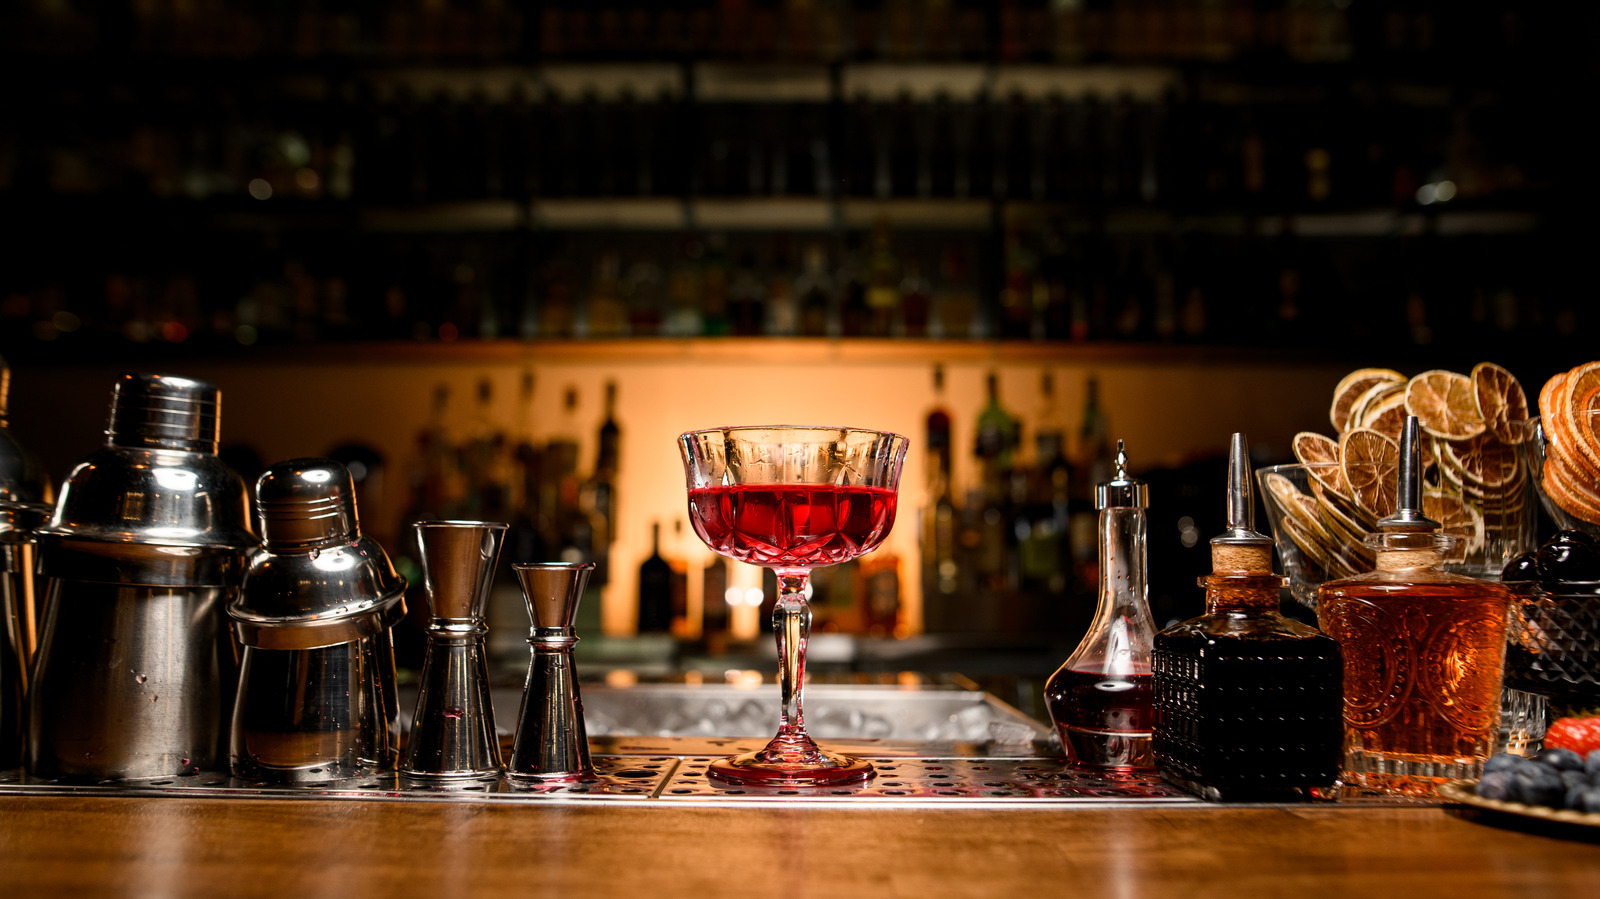 https://www.foodrepublic.com/img/gallery/the-cocktail-ordering-etiquette-to-help-you-get-a-better-drink/l-intro-1694105113.jpg